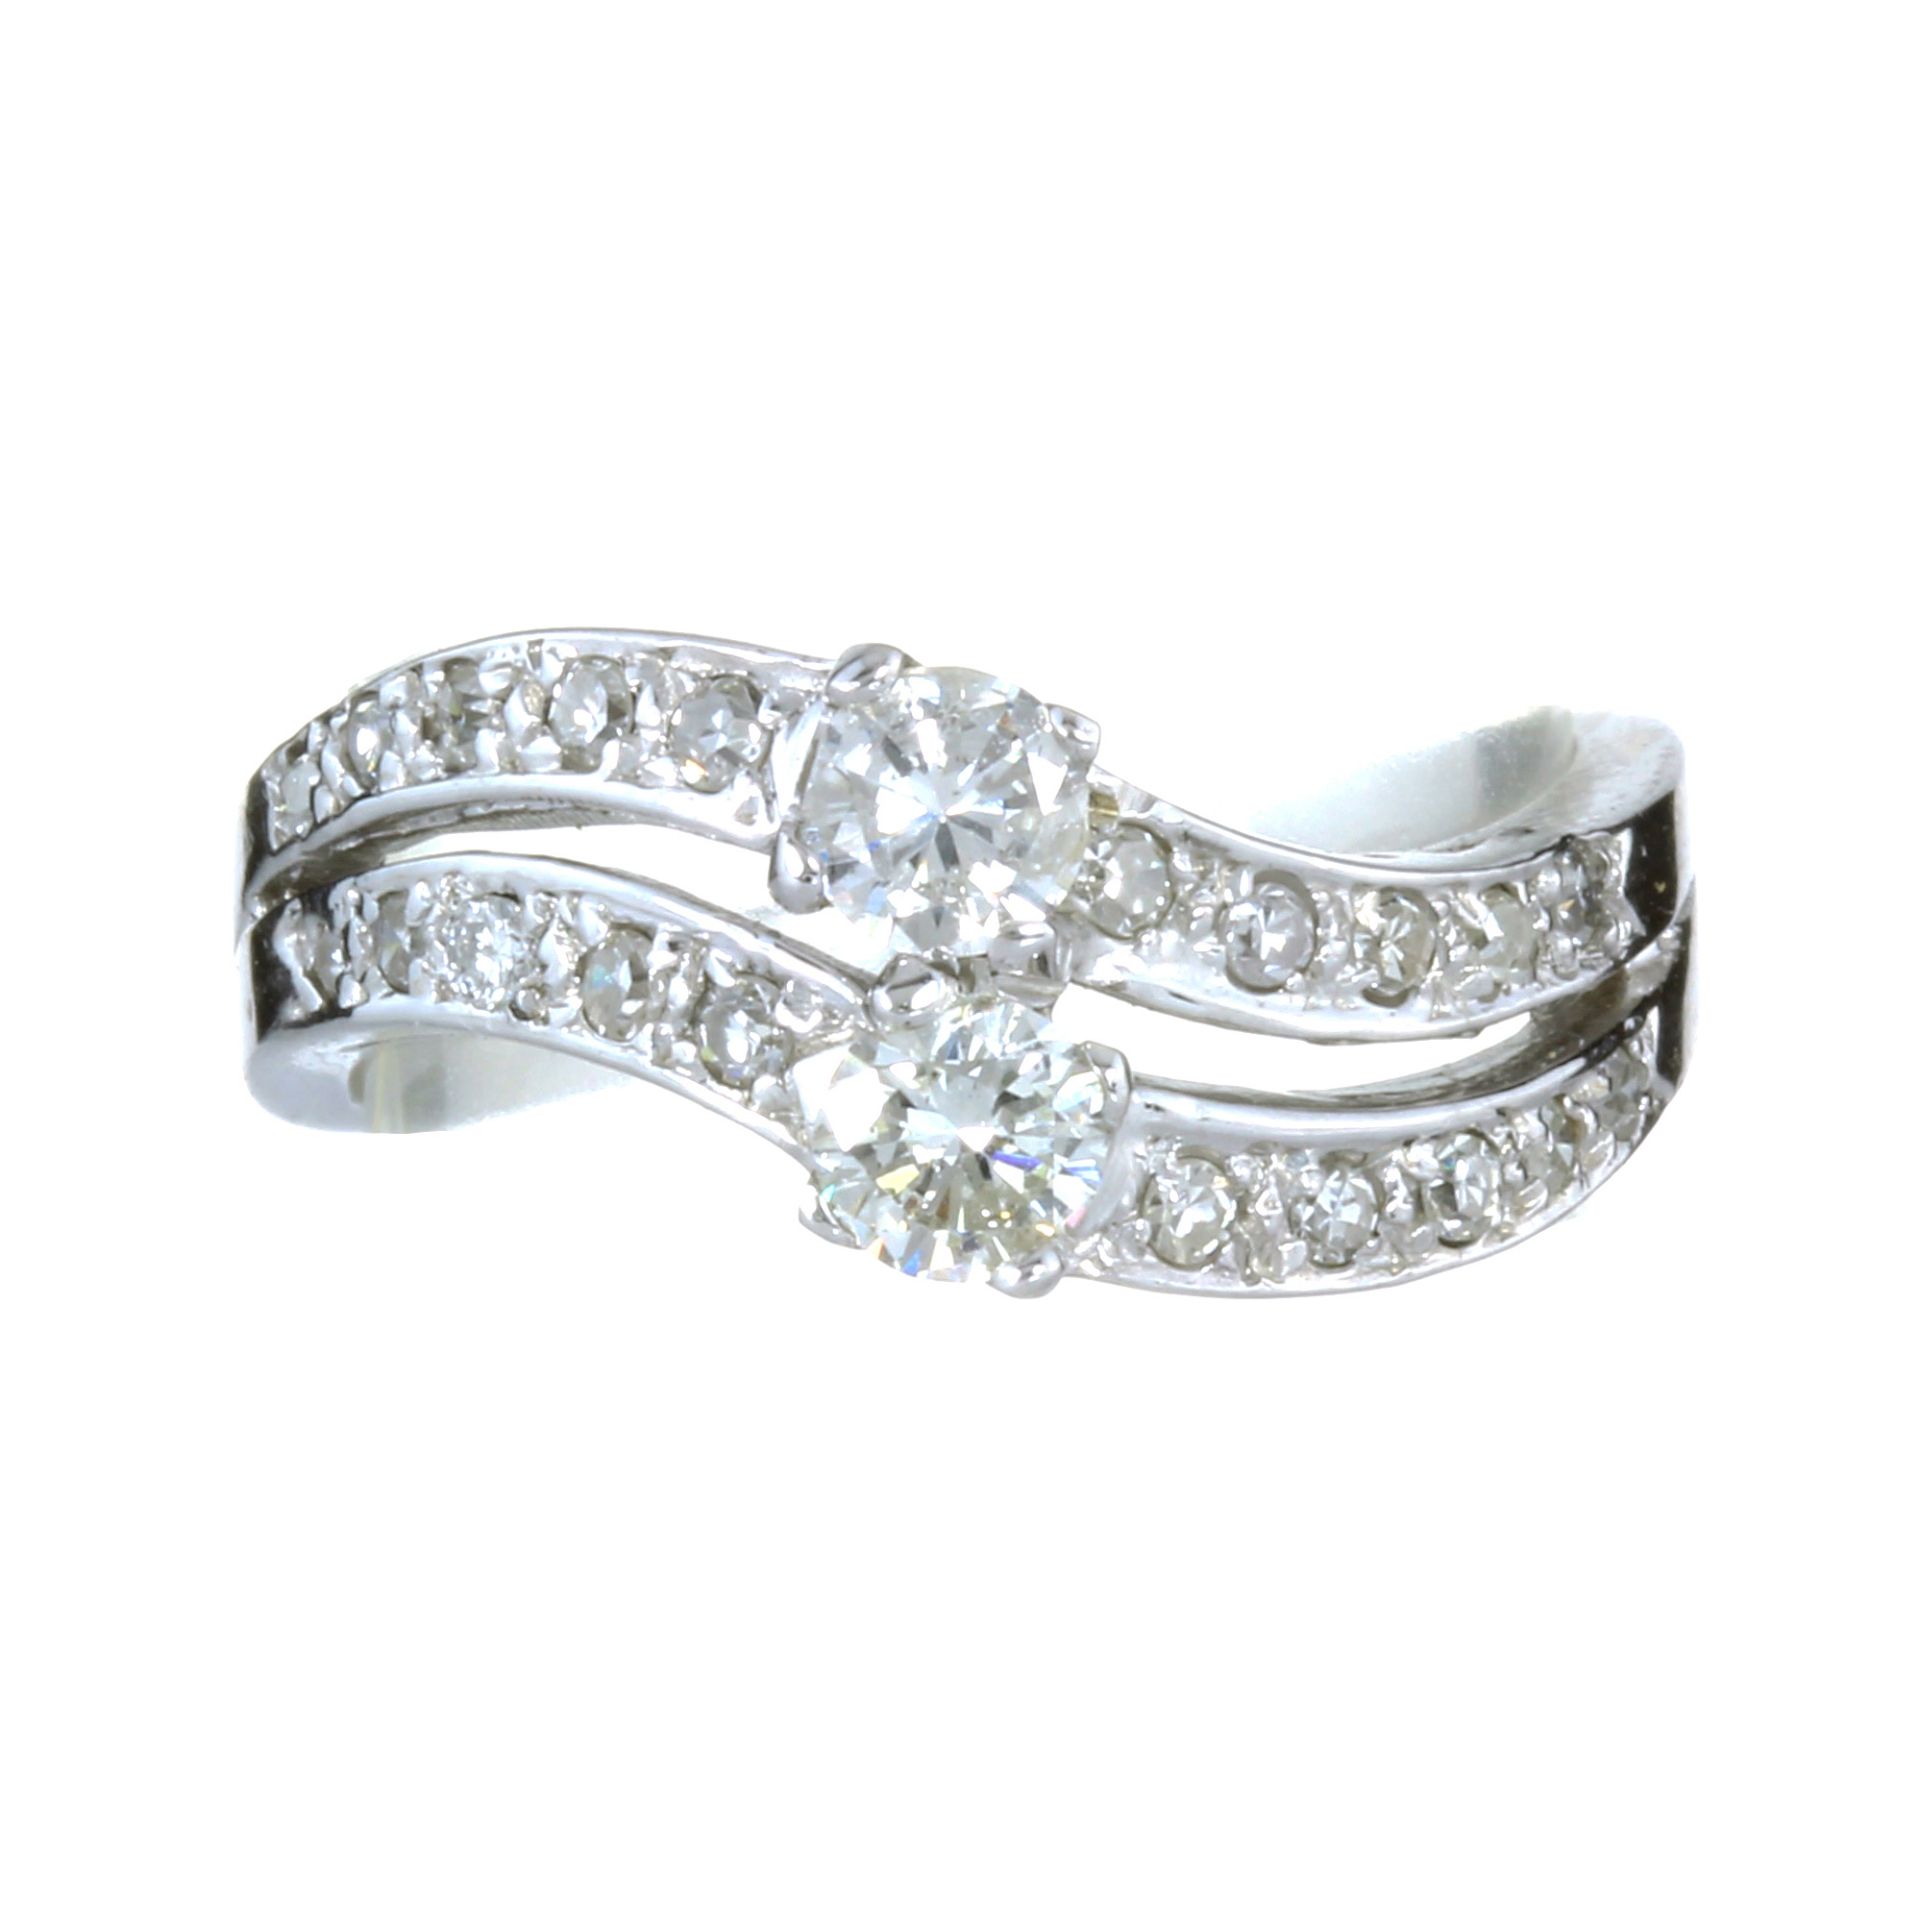 A DIAMOND DRESS RING in white gold or platinum designed as a split band each half set with a central